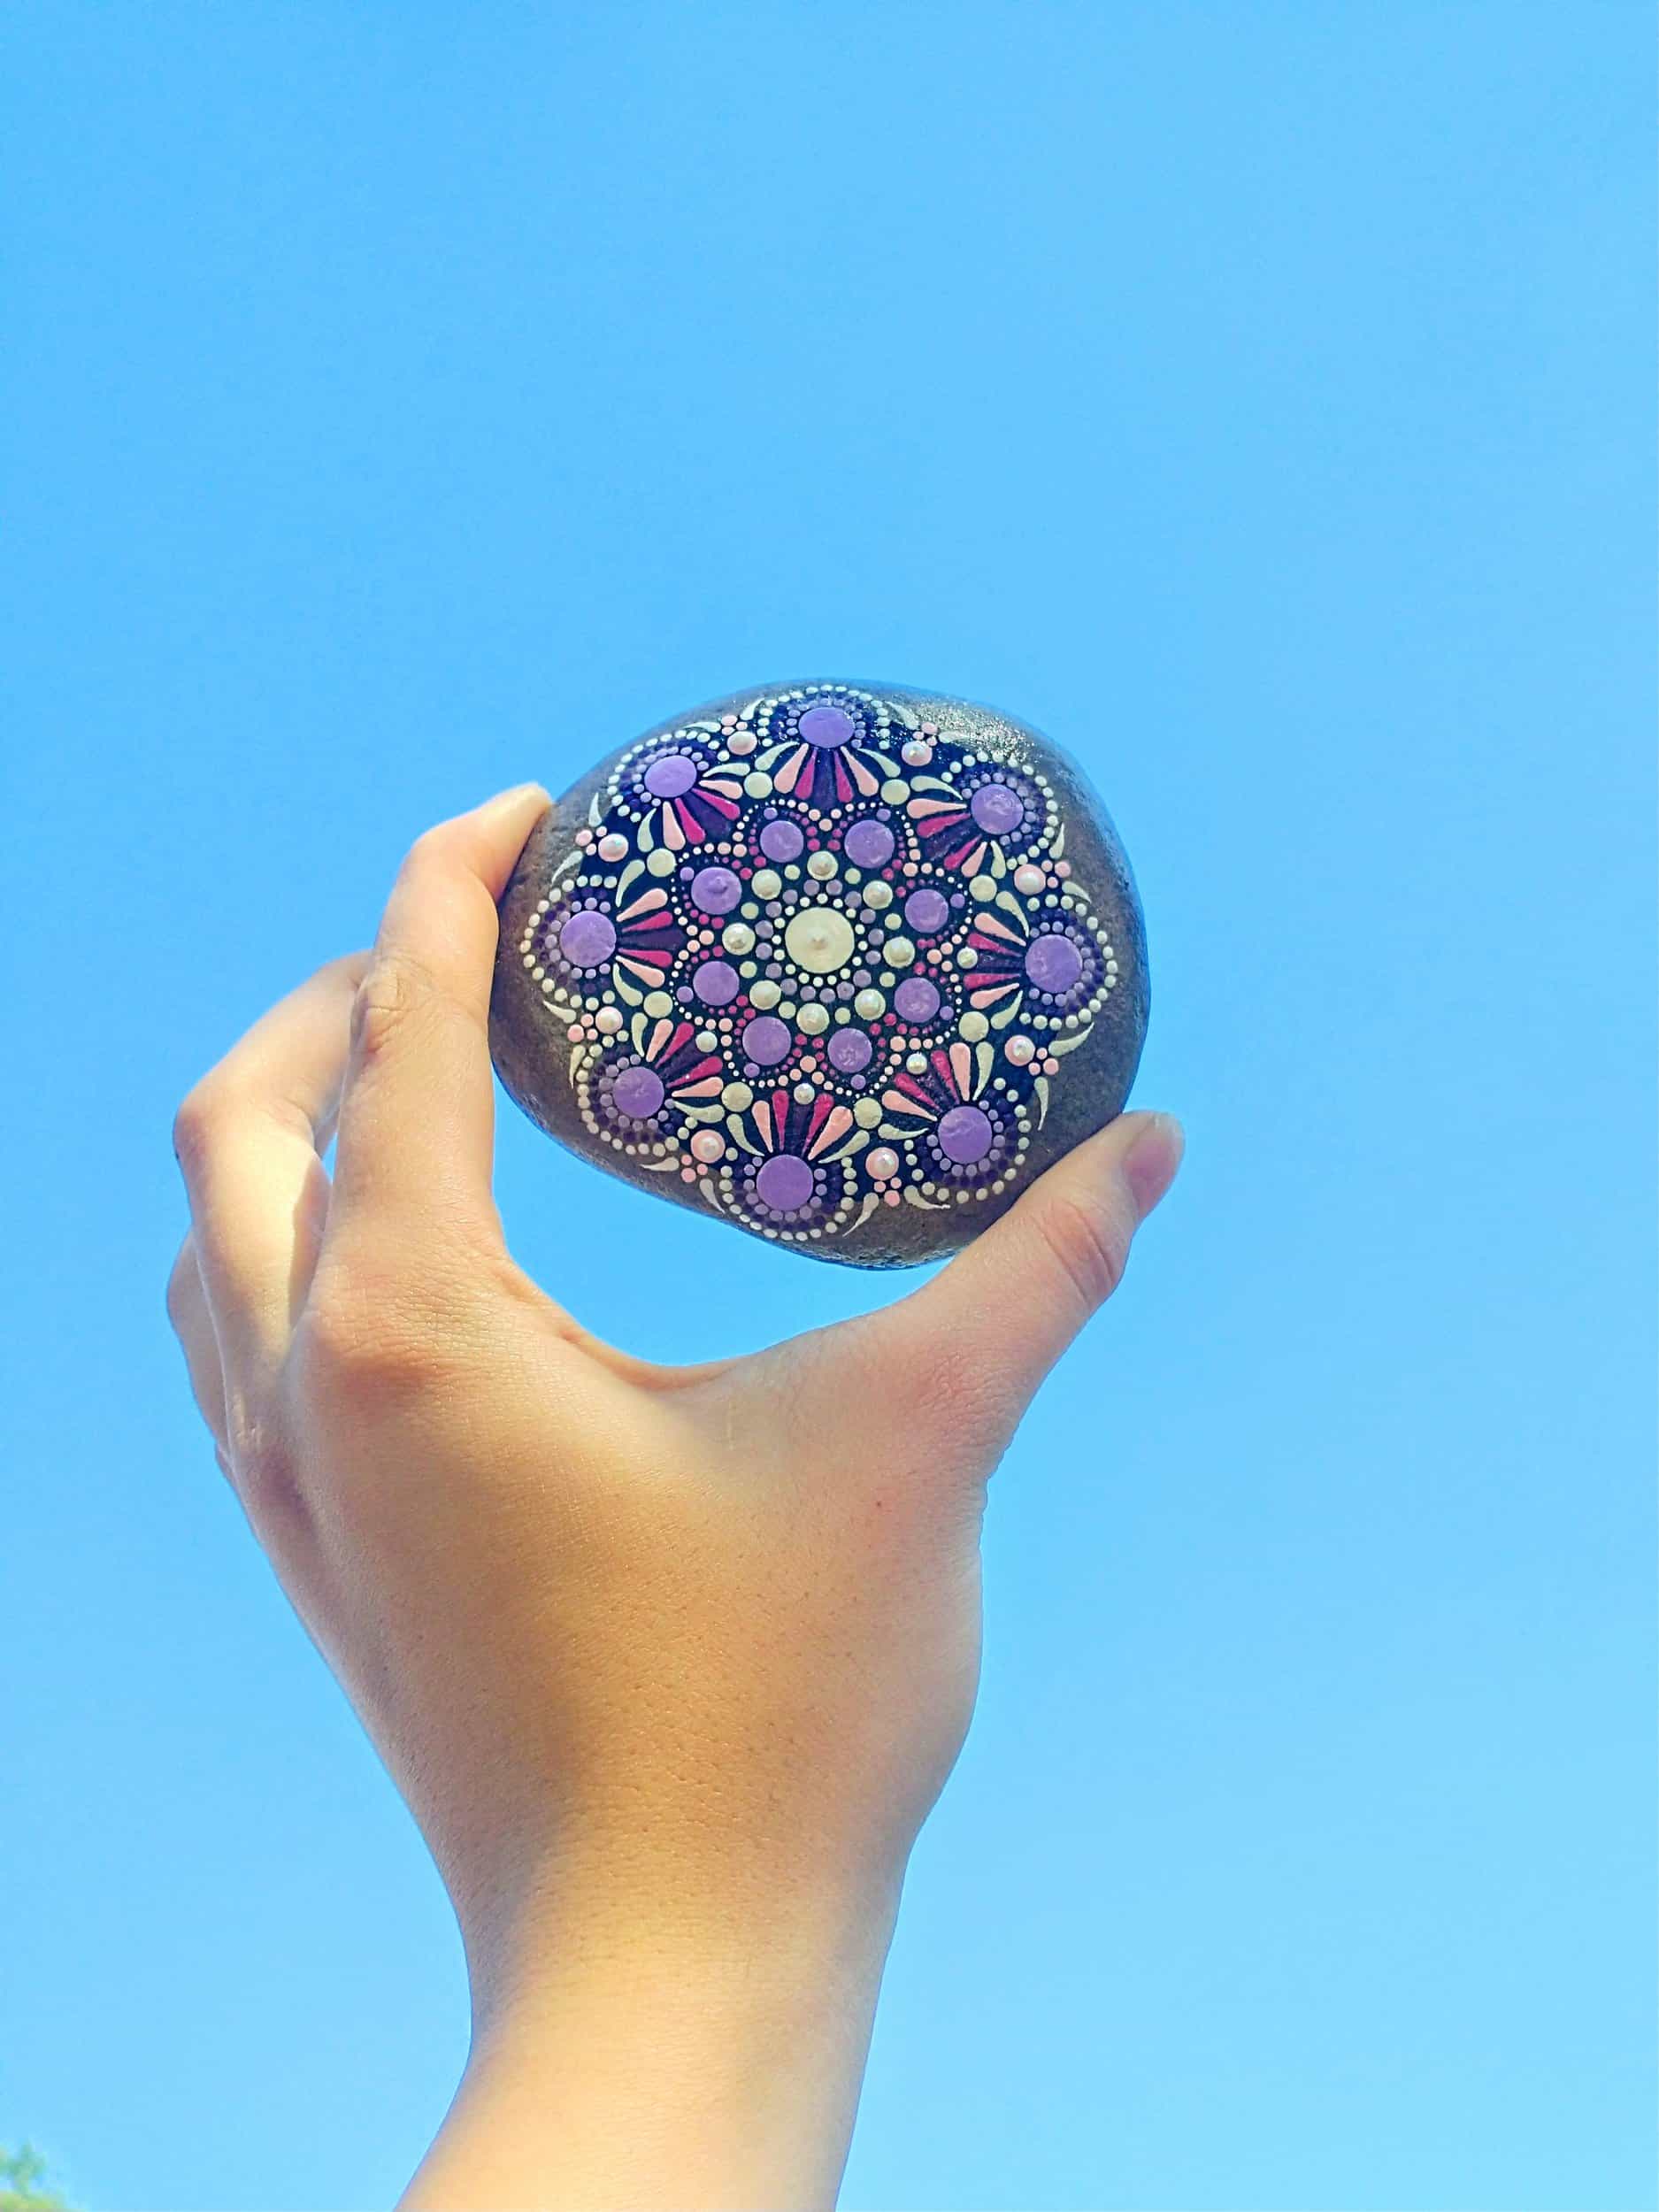 This Lavender Light is made with love by Amber Stones! Shop more unique gift ideas today with Spots Initiatives, the best way to support creators.